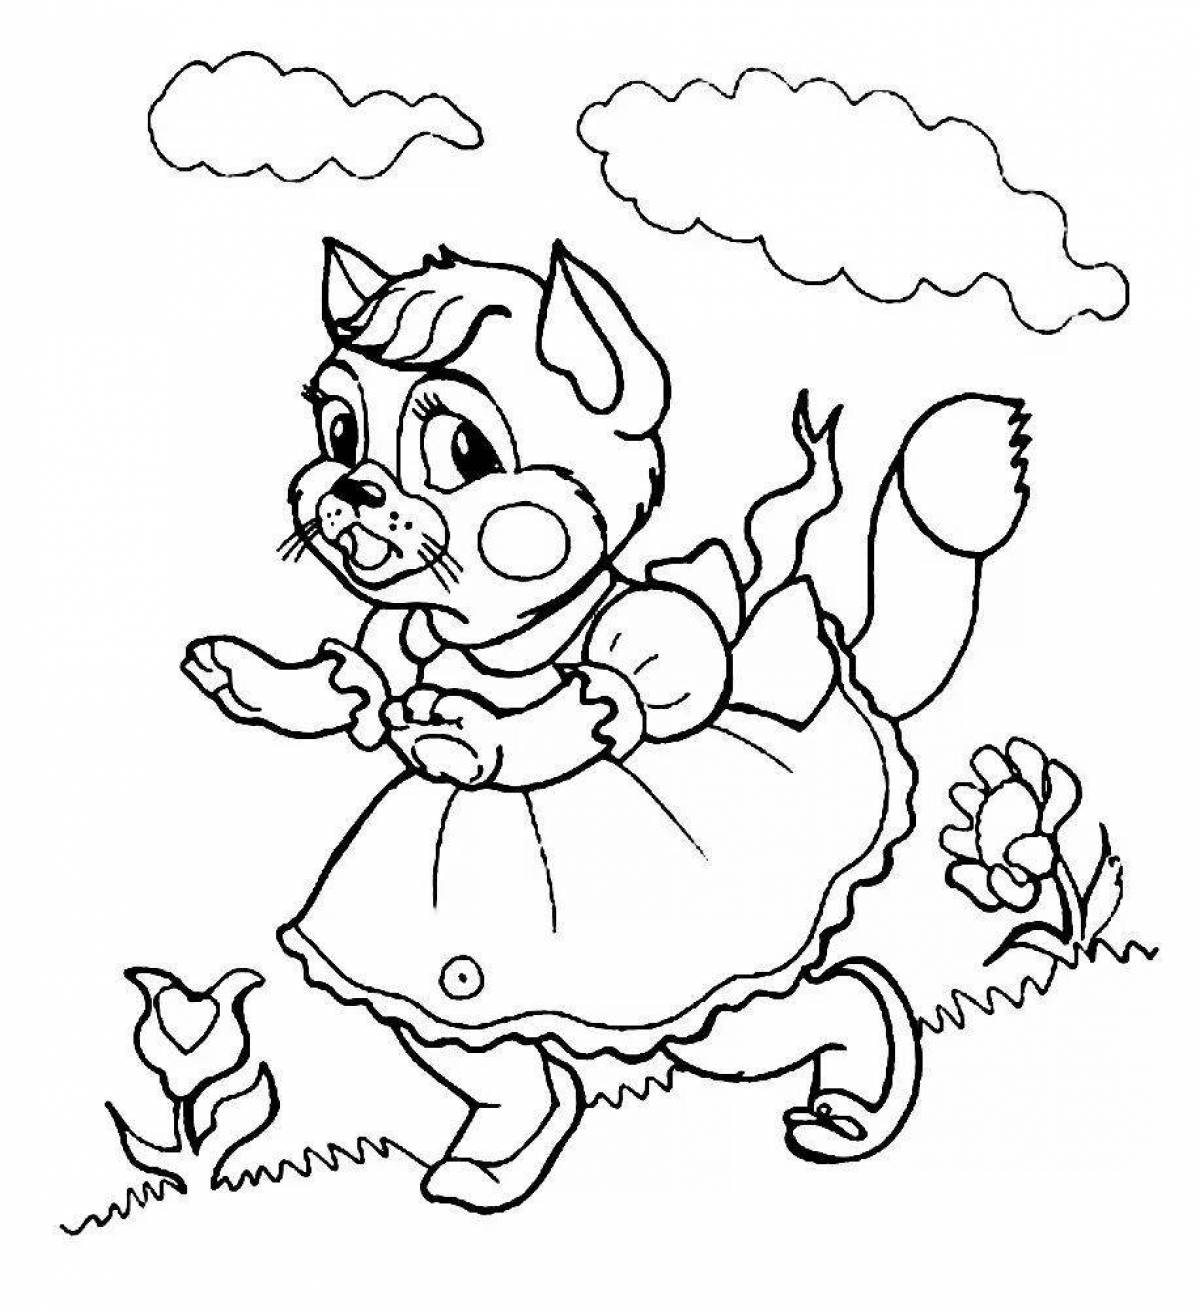 Playful cat house coloring page for pre-k